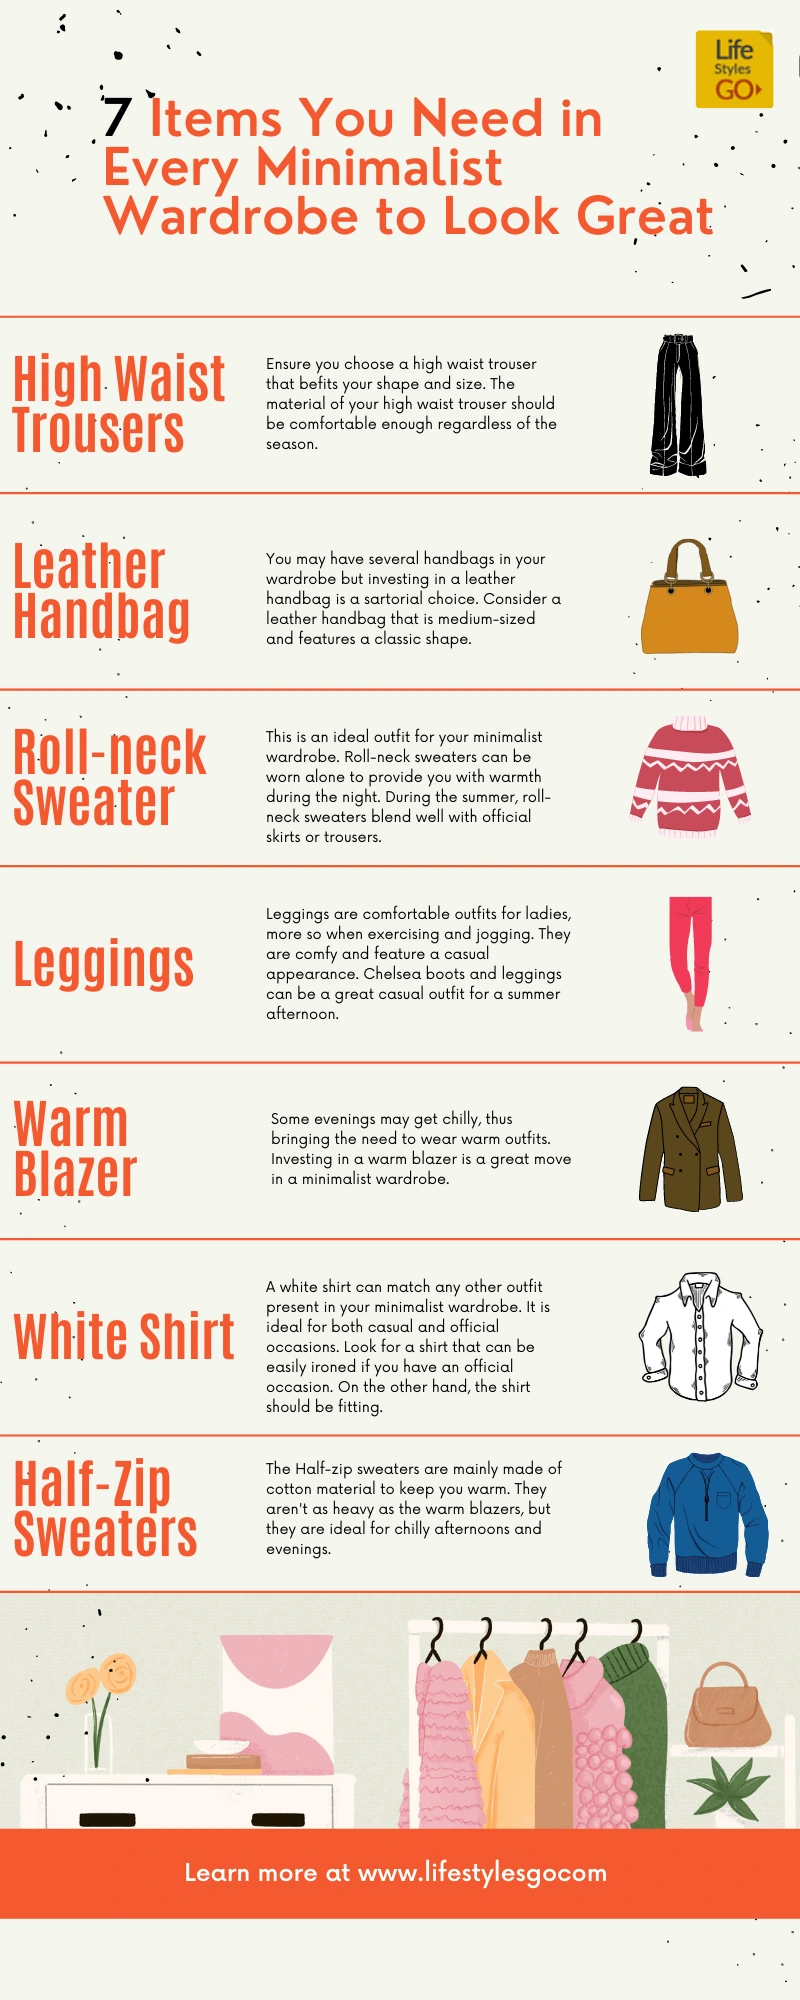 Items You Need in Every Minimalist Wardrobe Infographic